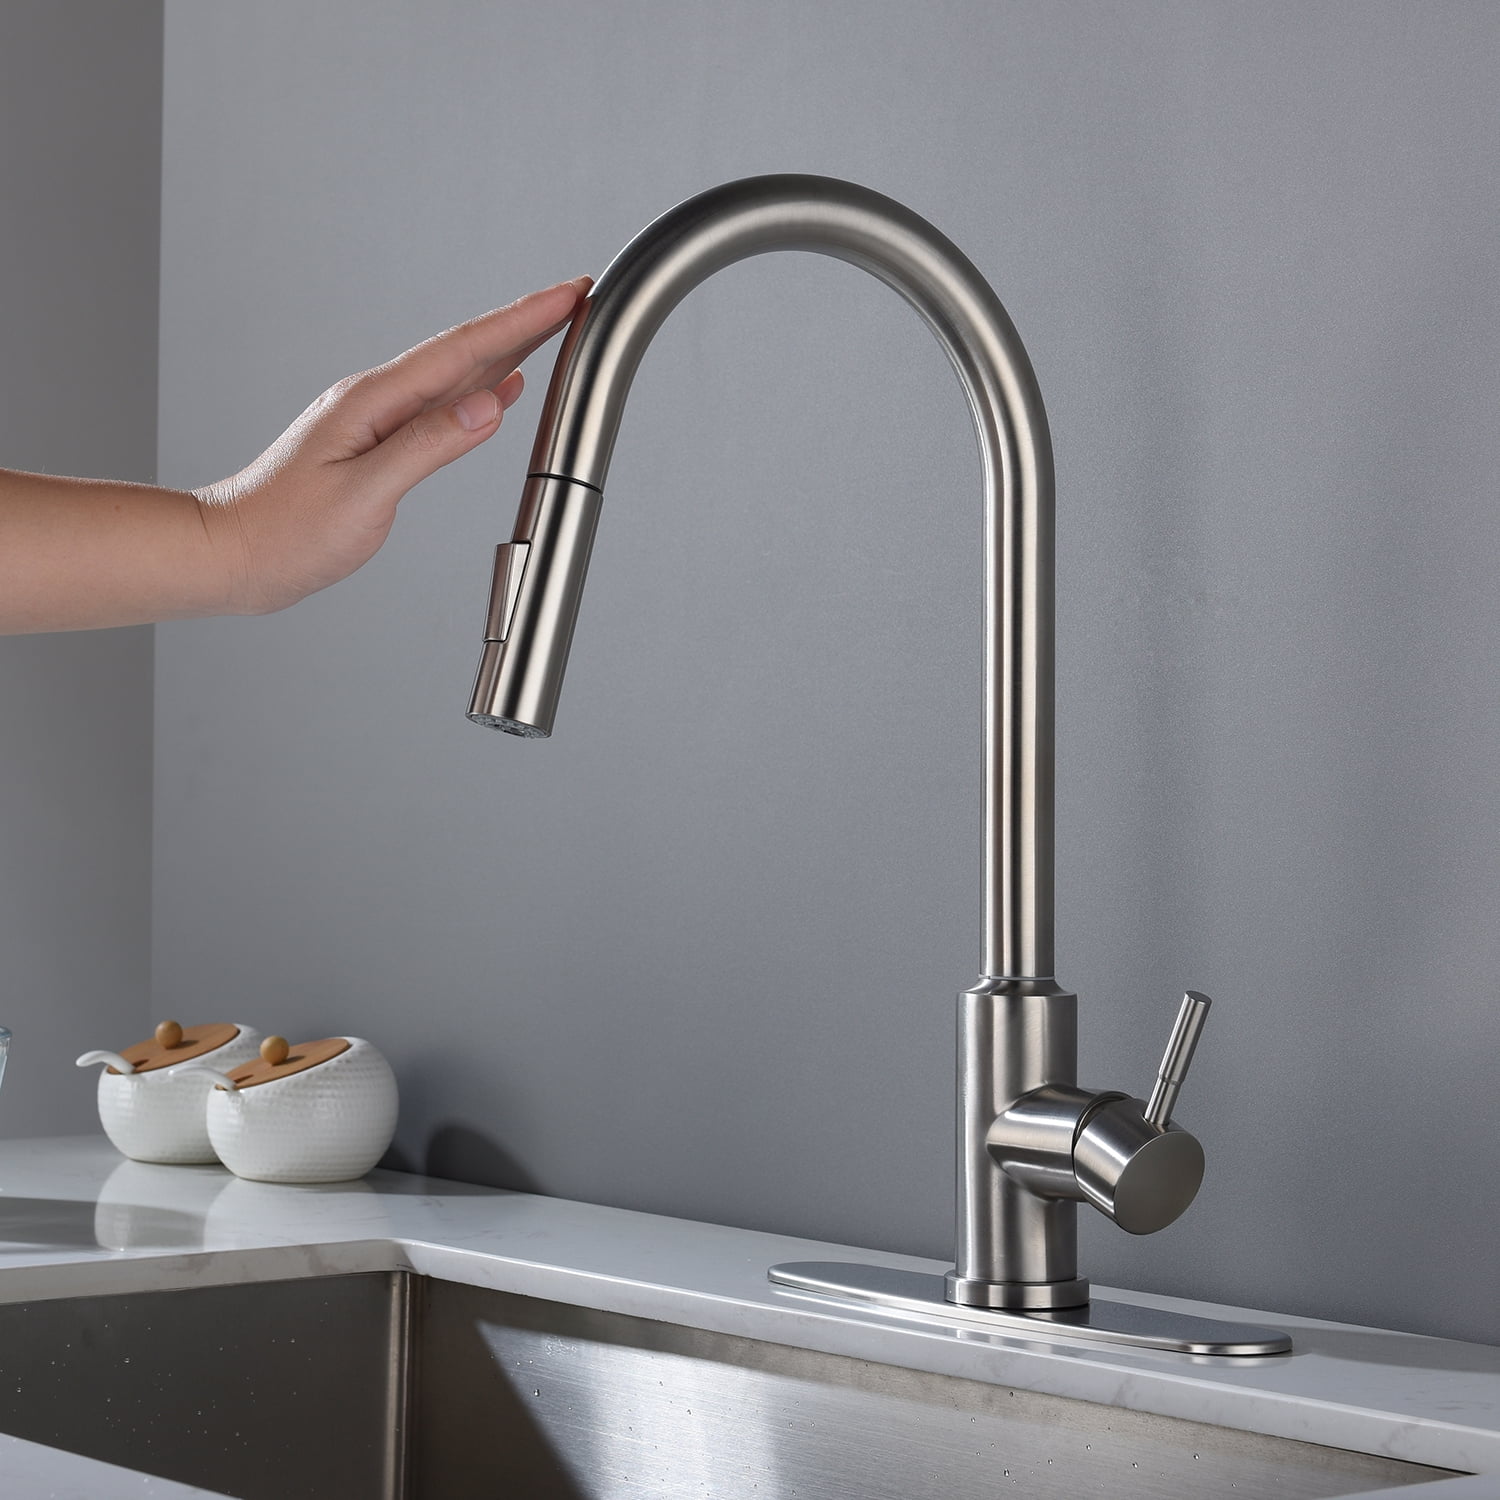 Details about   Automatic Touch Sensor Kitchen Faucet Sink Pull down Sprayer Stainless Steel 